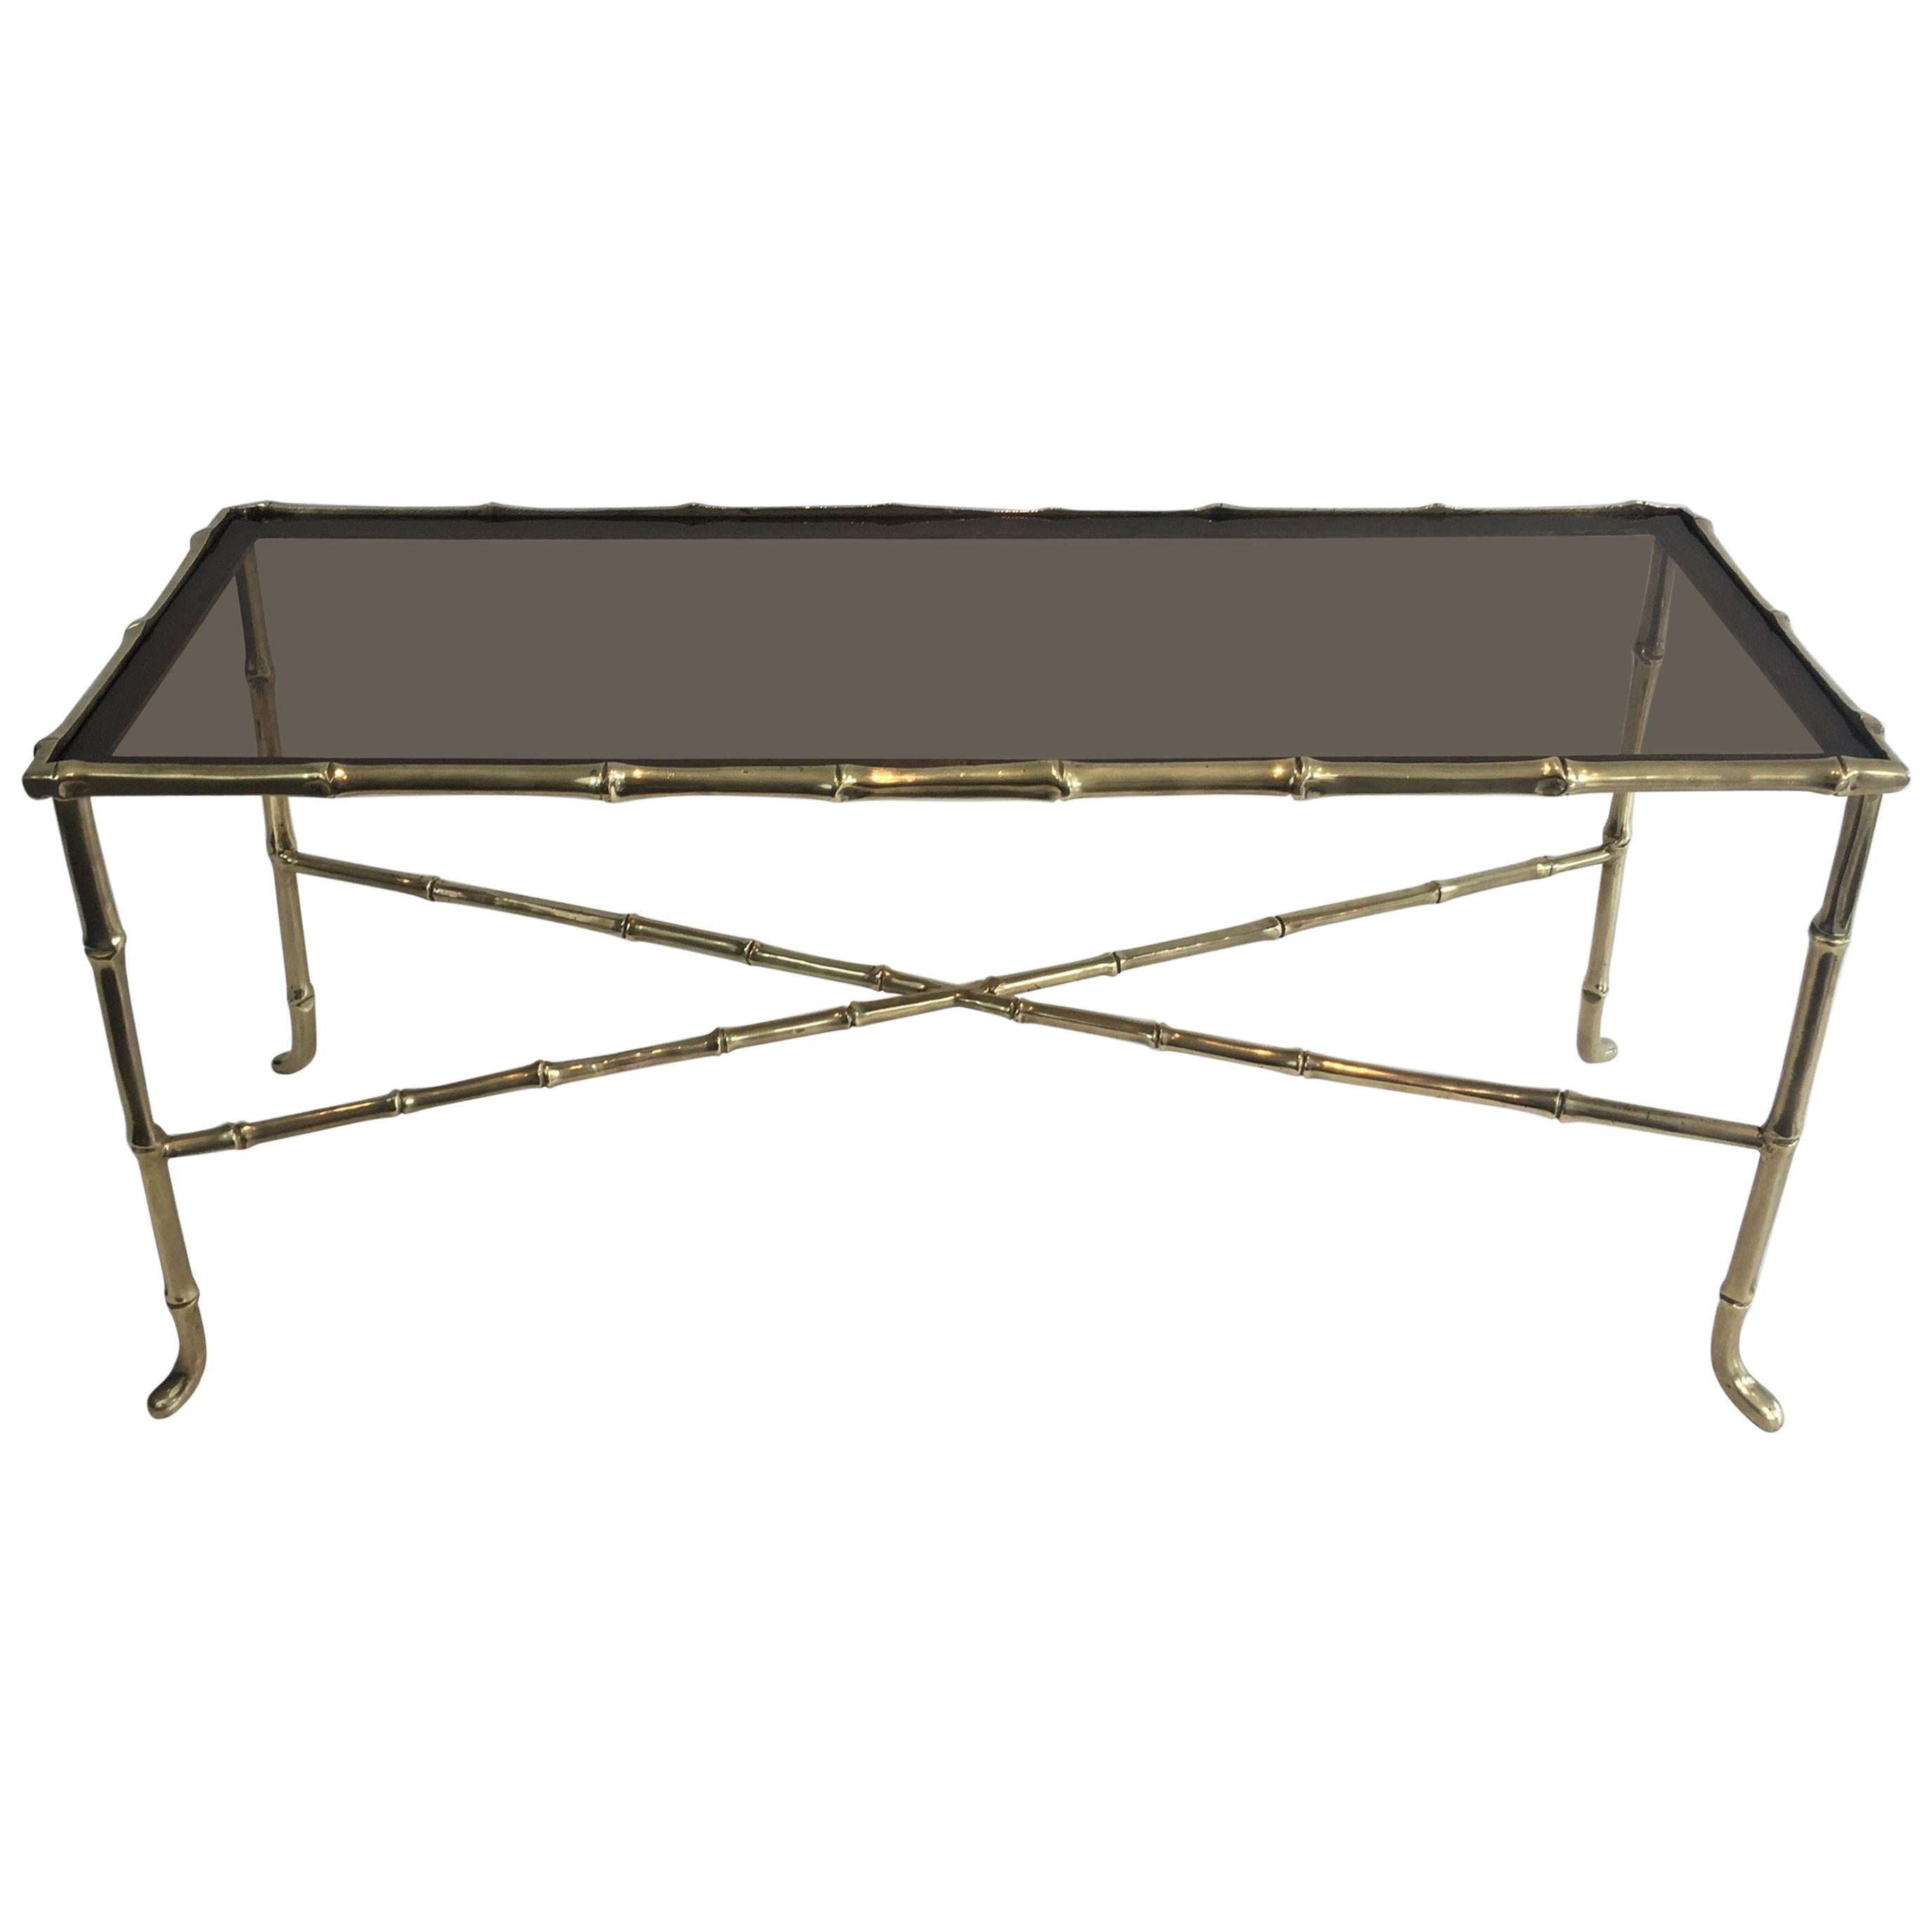 Maison Baguès, Small Faux-Bamboo Bronze Coffee Table with Smoked Glass Shelf